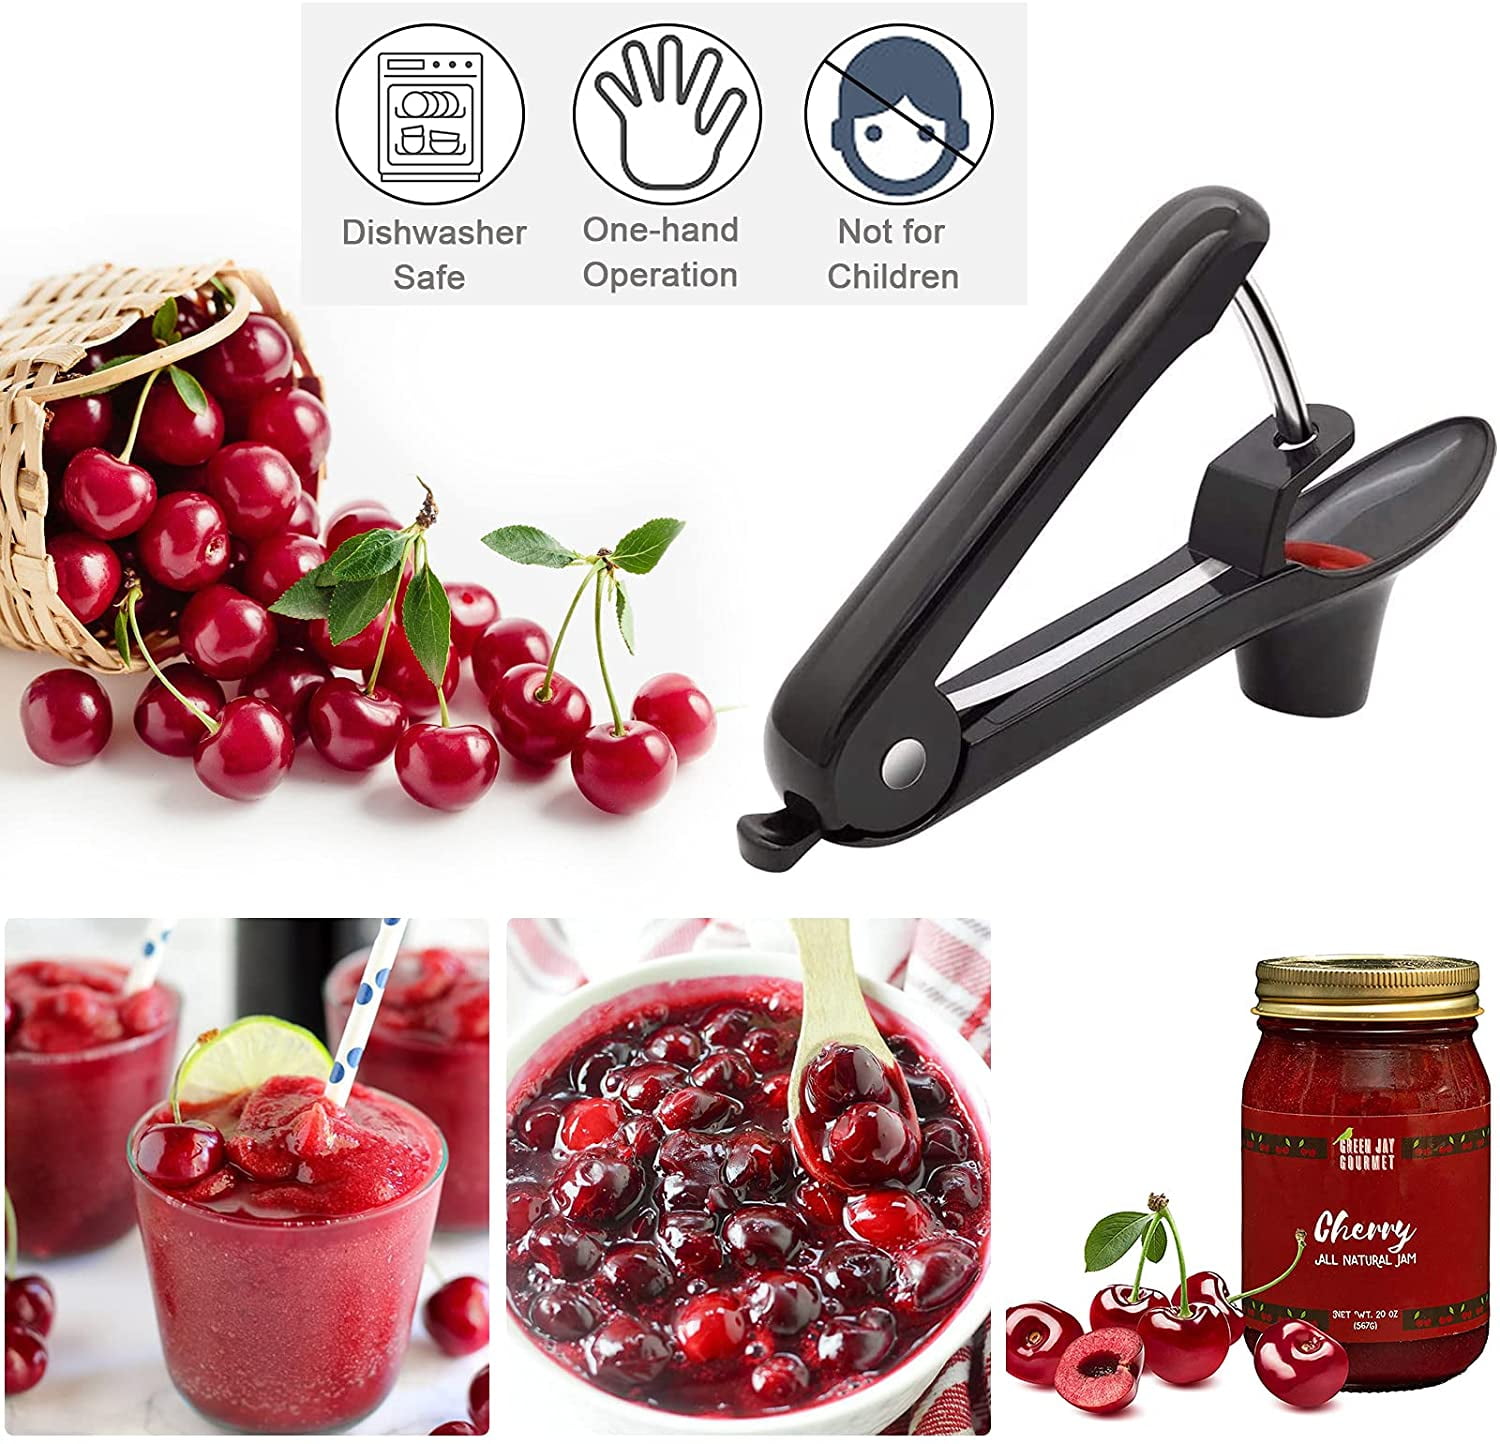 Non-Slip feet LEVIVO Cherry Pitter Stainless Steel Components Cherry Core Remover with a Slanted Chute and a Large Pit Box 2 Silicone Cherry Holders Dishwasher Safe 